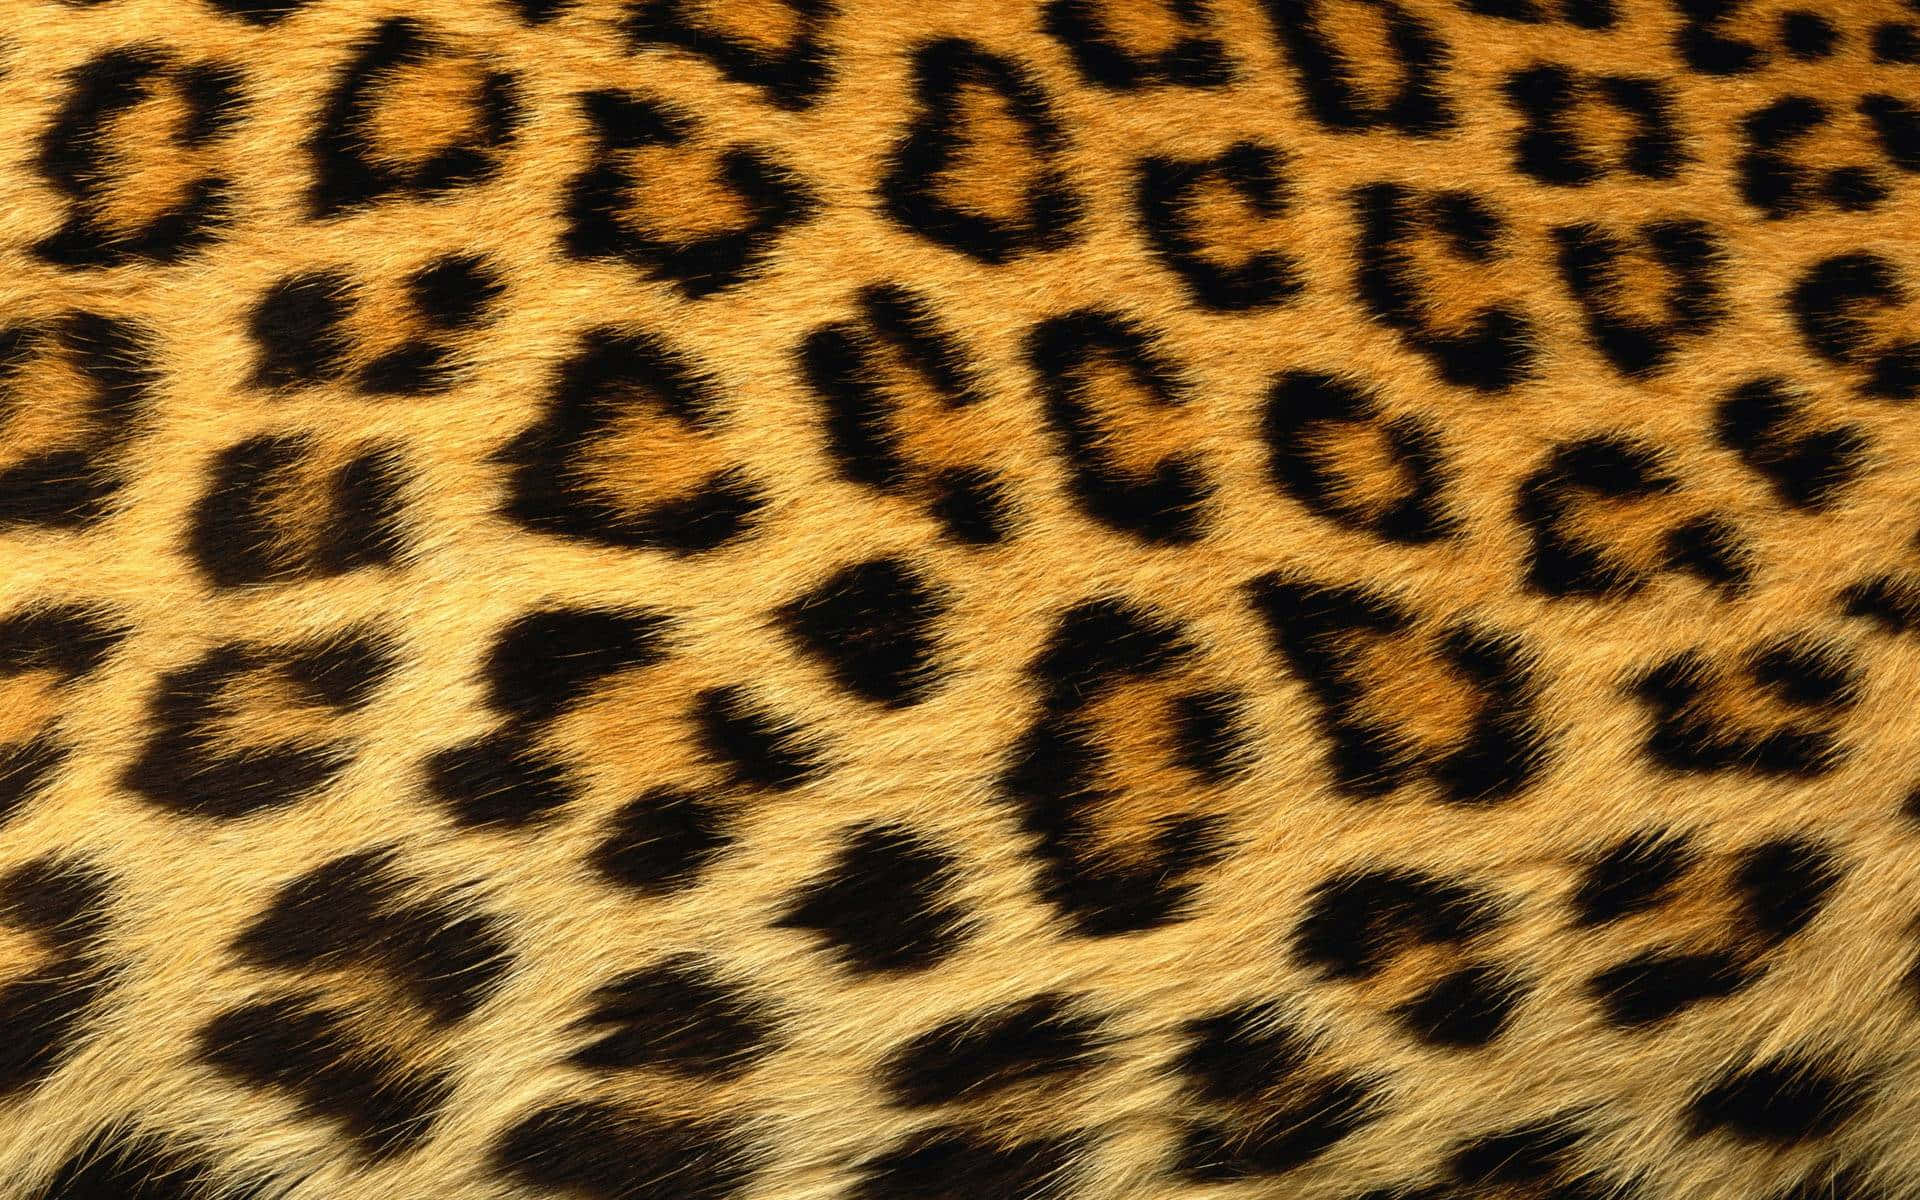 The vibrant cheetah print background is a great way to add a wild, energetic touch to your space!